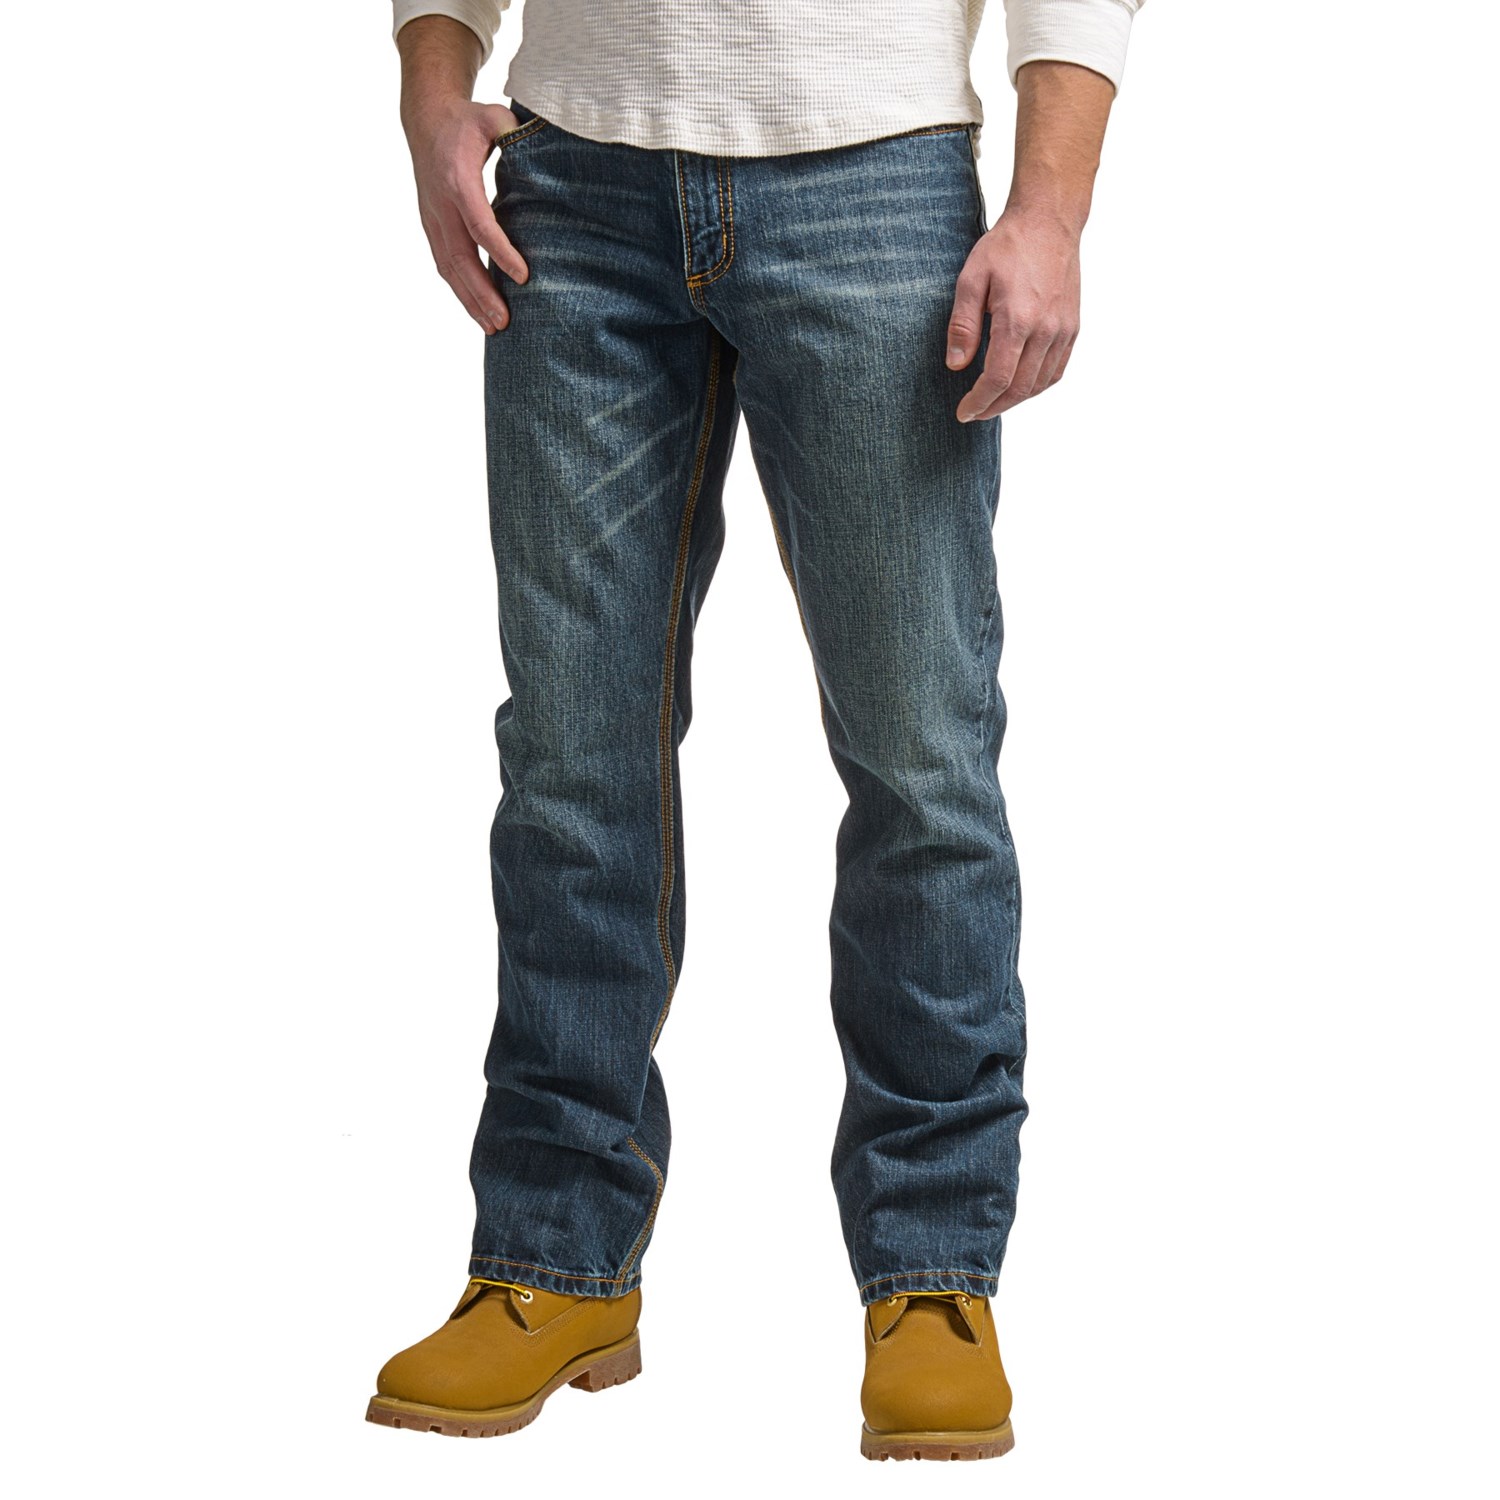 Carhartt Series 1889 Relaxed Fit Jeans (For Men)